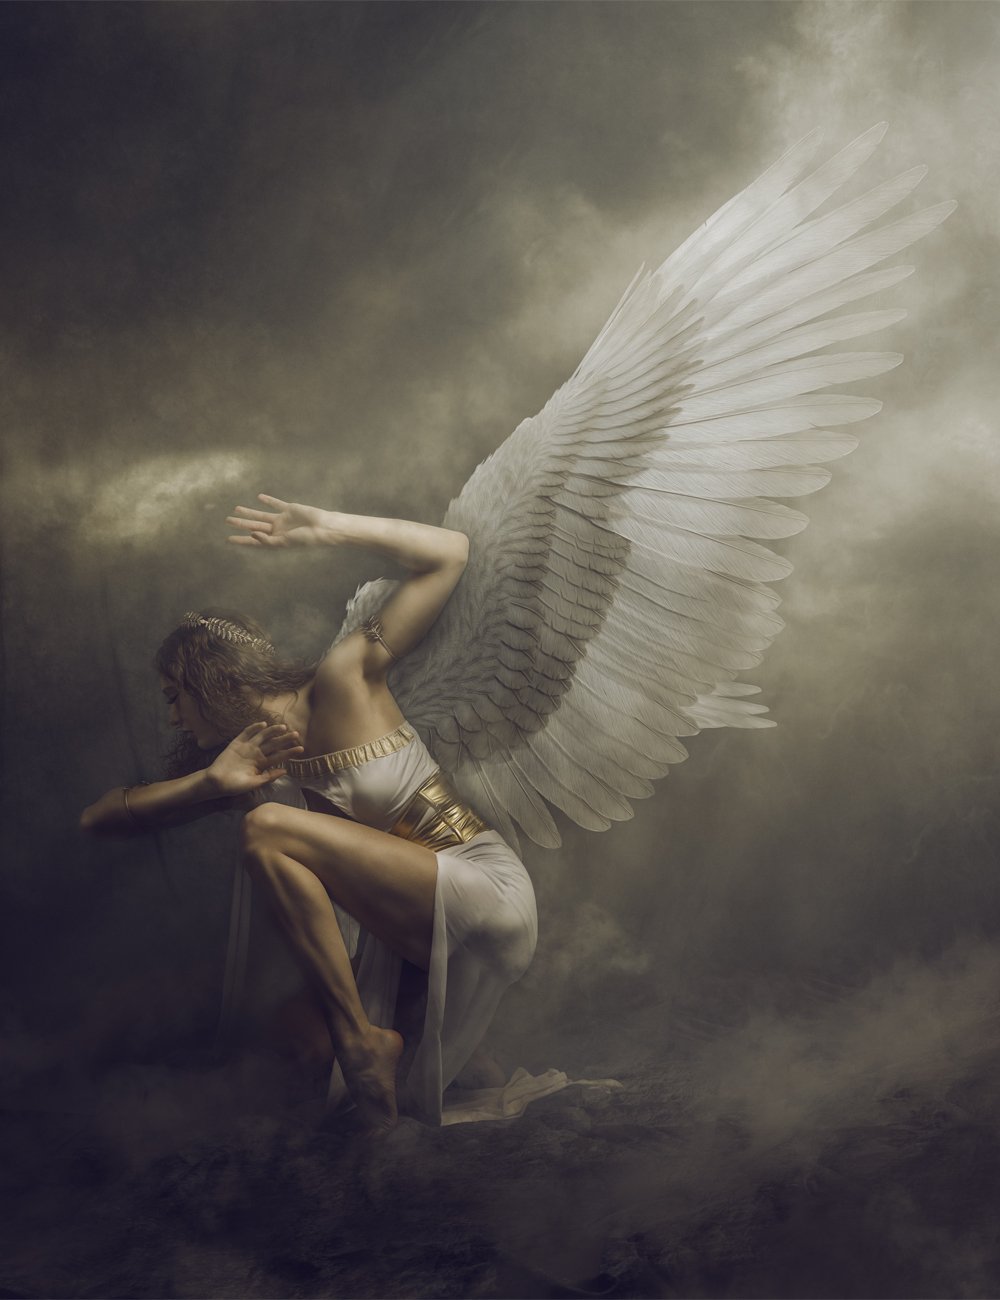 Descended Angel Video Course: Digital Compositing with Daz Studio and Photoshop by: Geekatplay, 3D Models by Daz 3D